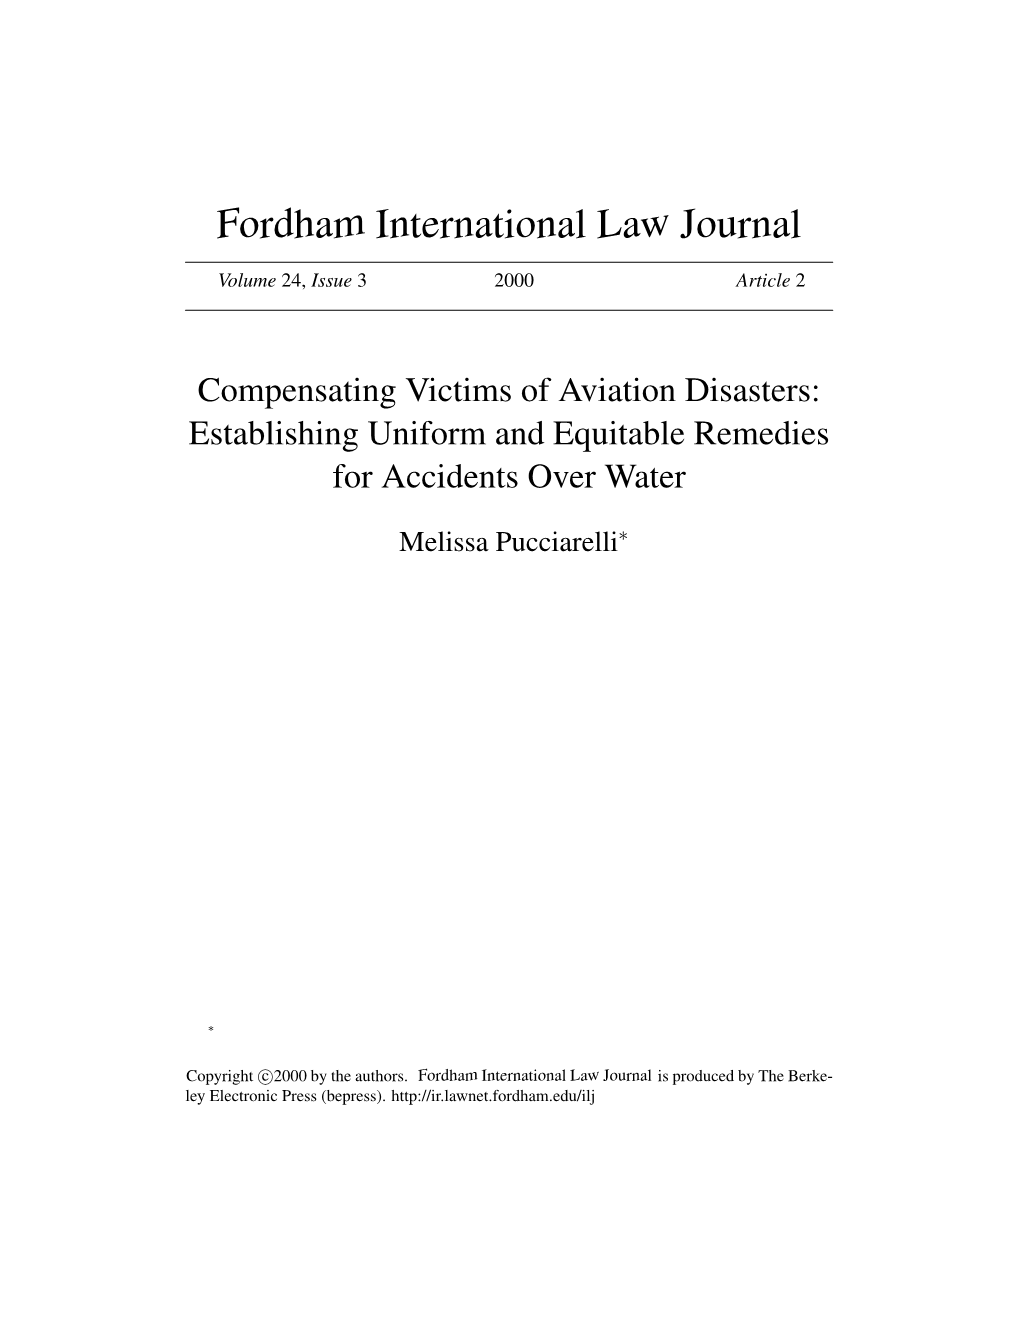 Compensating Victims of Aviation Disasters: Establishing Uniform and Equitable Remedies for Accidents Over Water